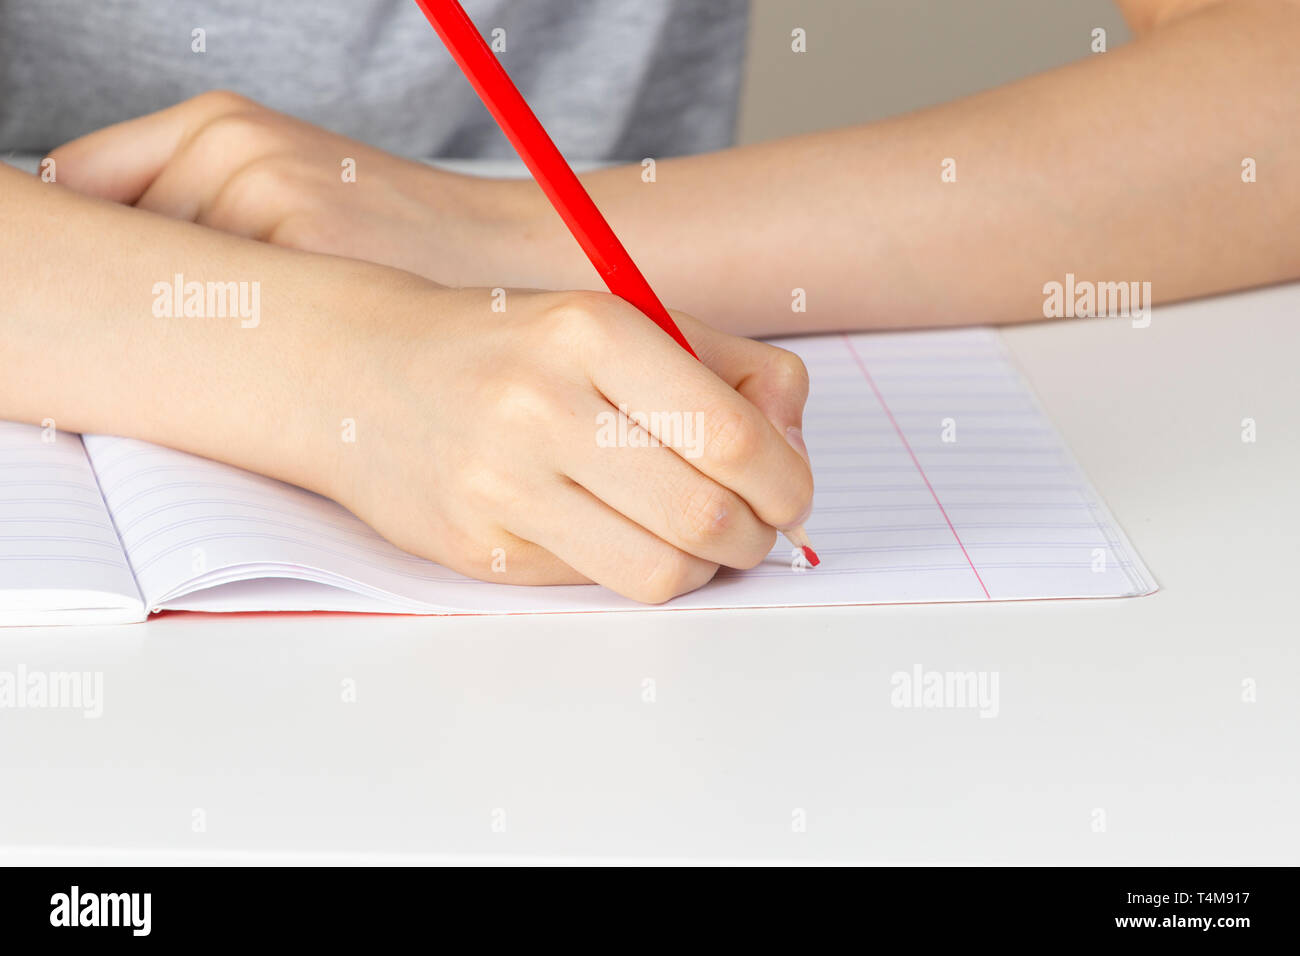 Kid hand holding red pencil against blank page of notebook. Stock Photo